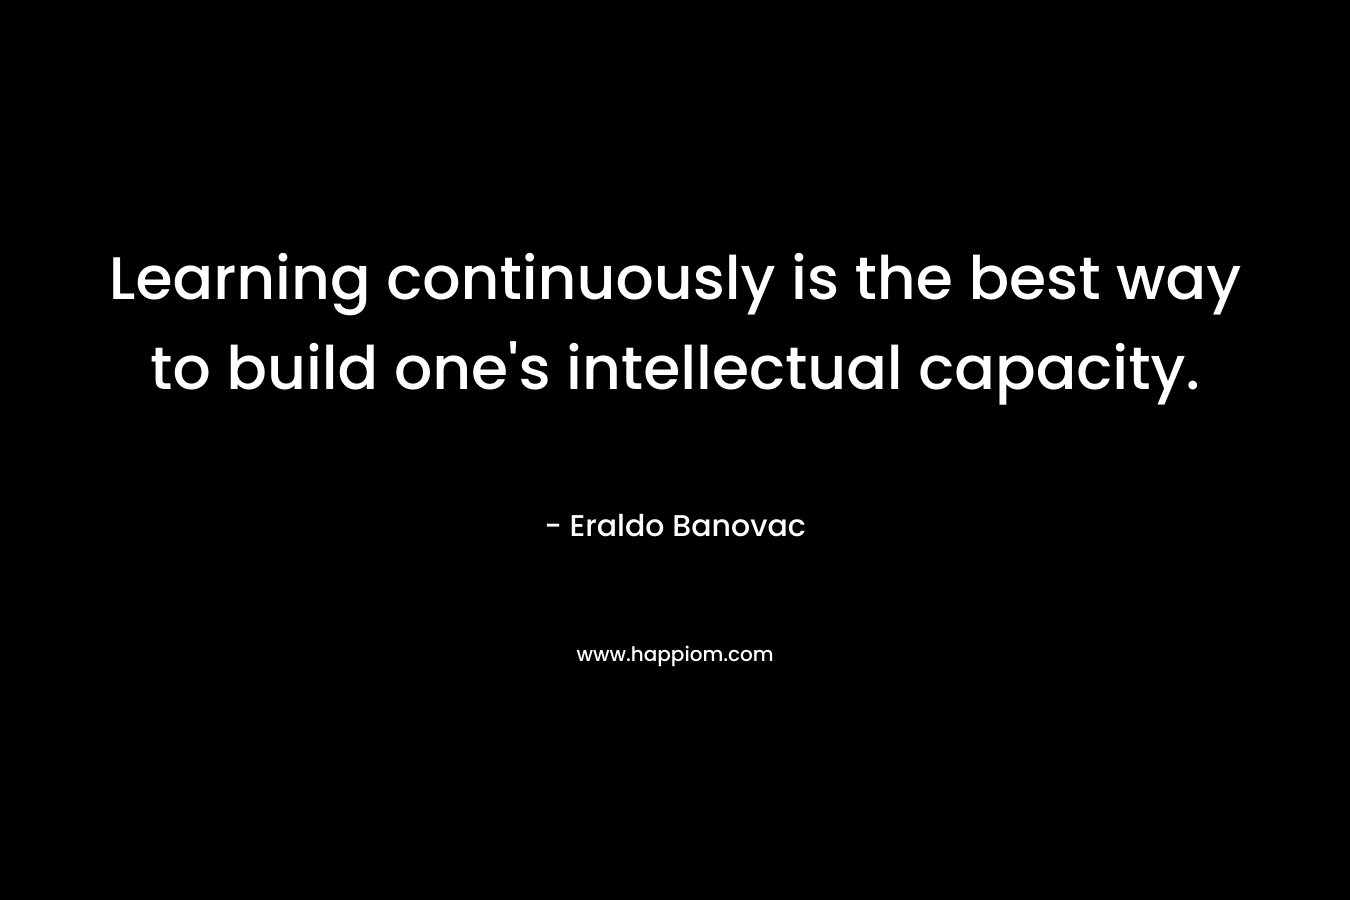 Learning continuously is the best way to build one's intellectual capacity.